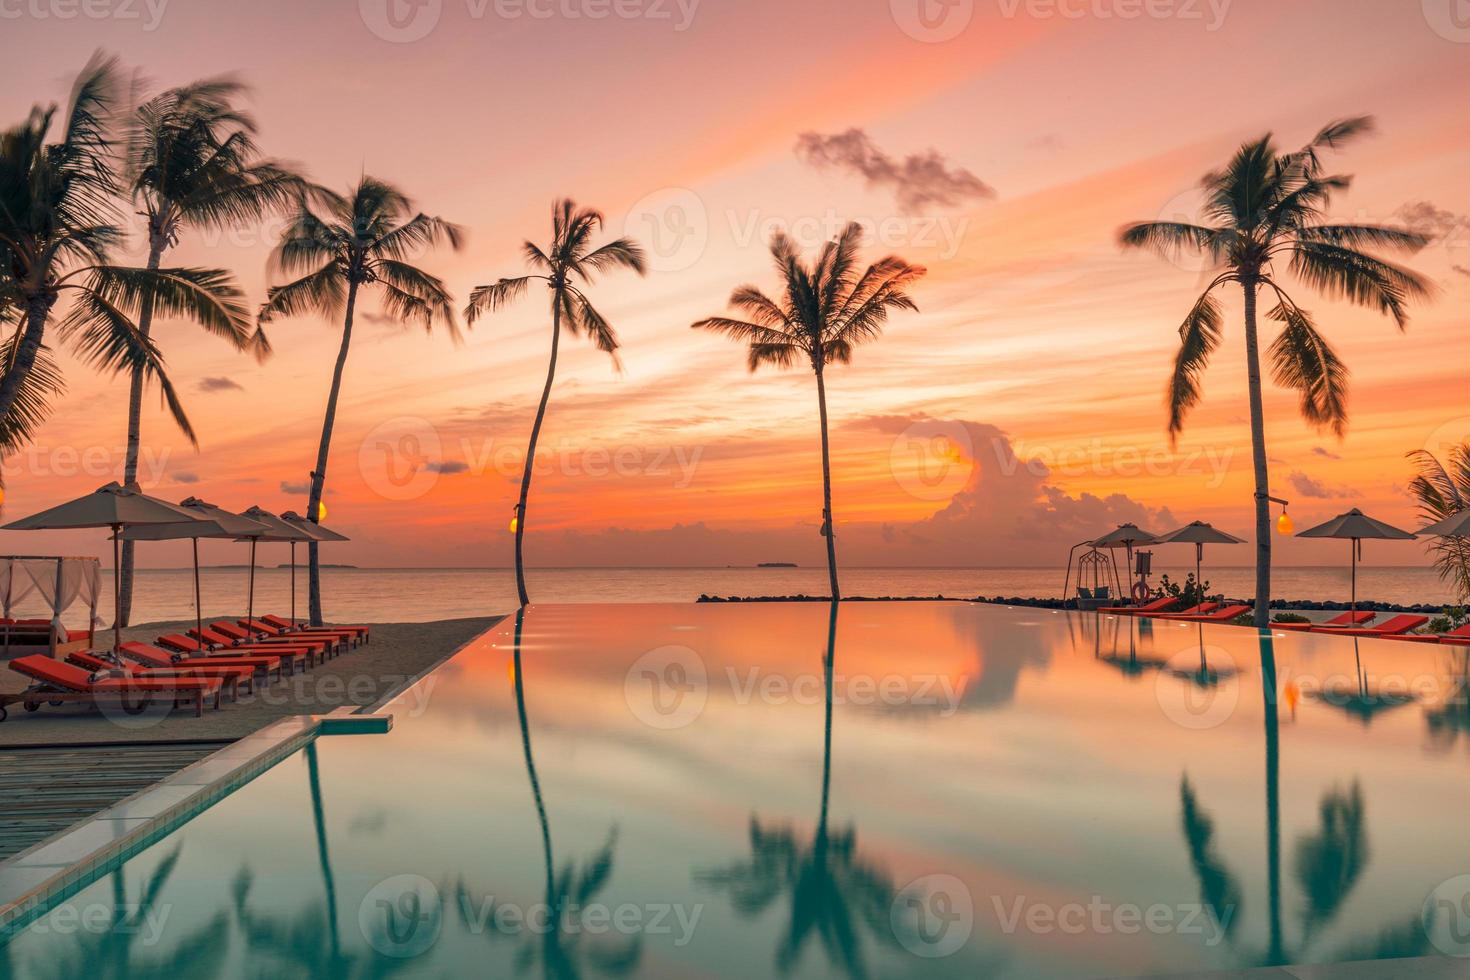 Perfect beach sunset, relaxation pool in a luxurious beachfront hotel resort in sunset light perfect beach holiday vacation banner. Sunset beach landscape. Loungers palm tree infinity pool reflections photo